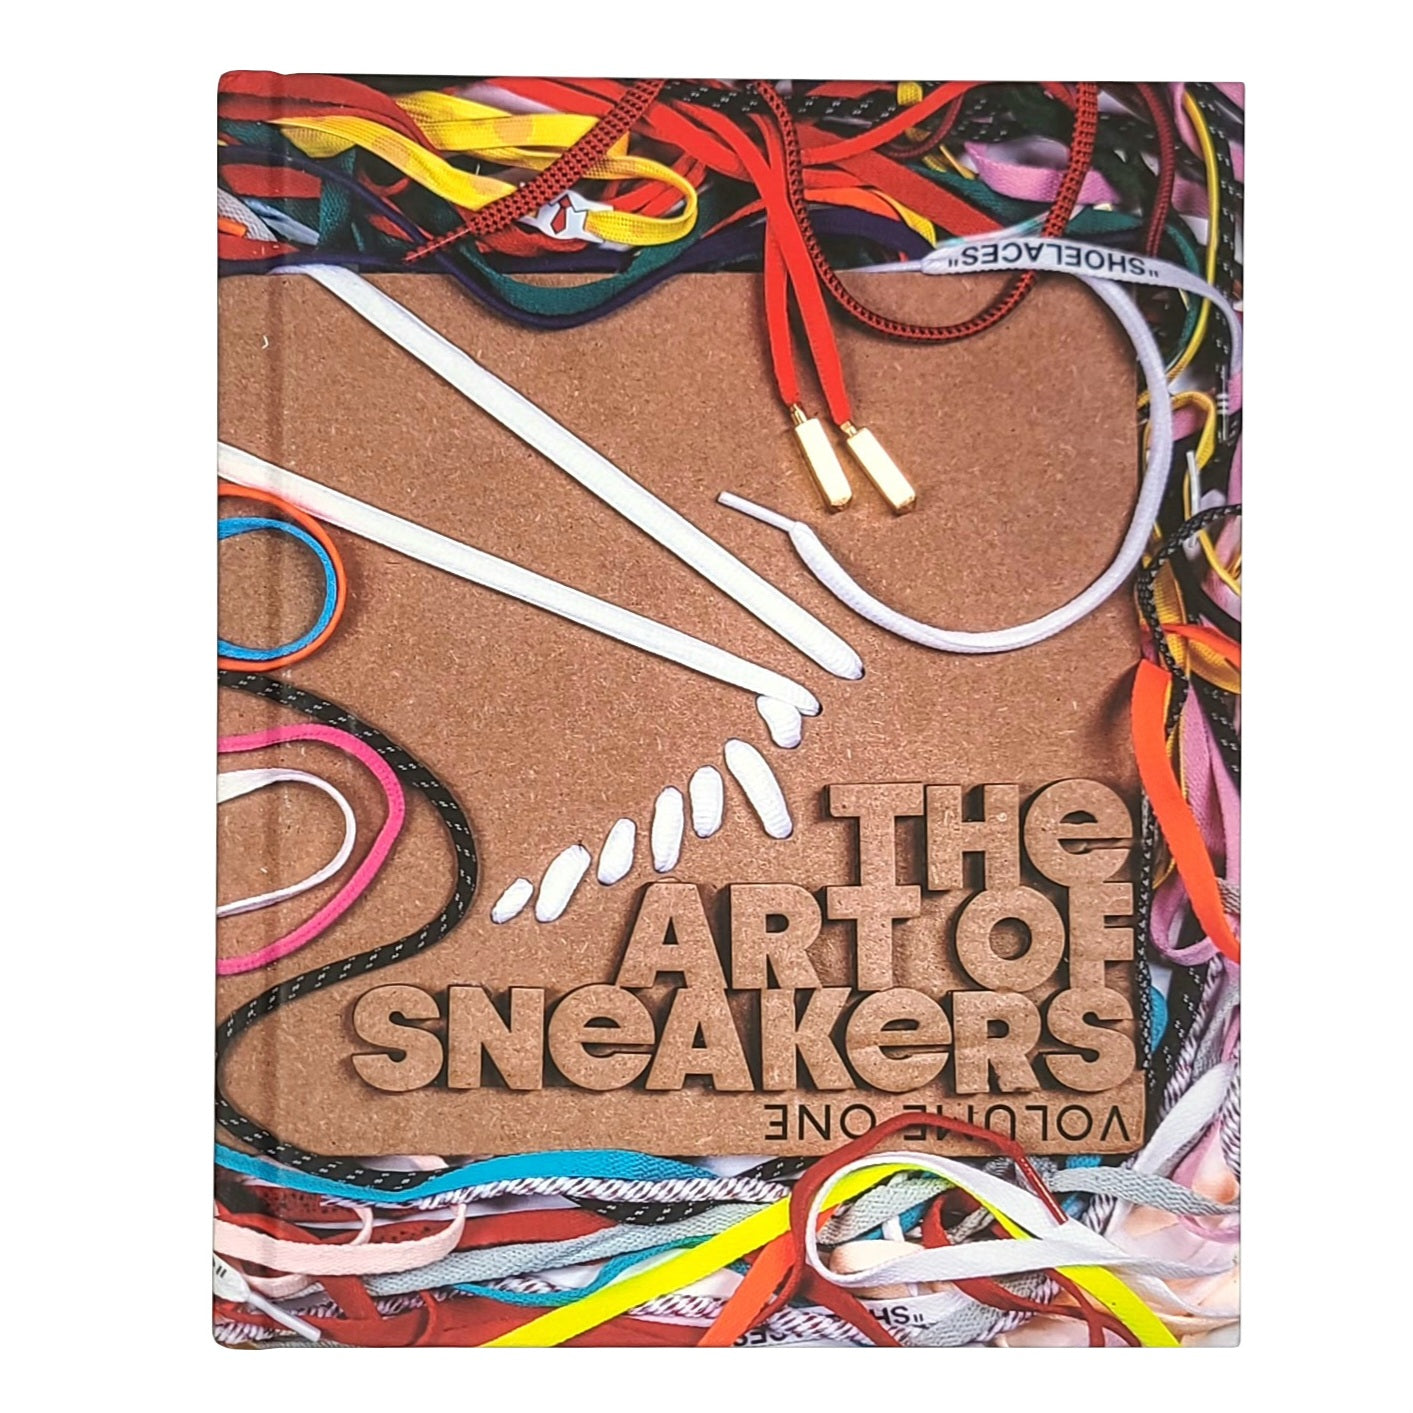 The Art Of Sneakers: Volume One